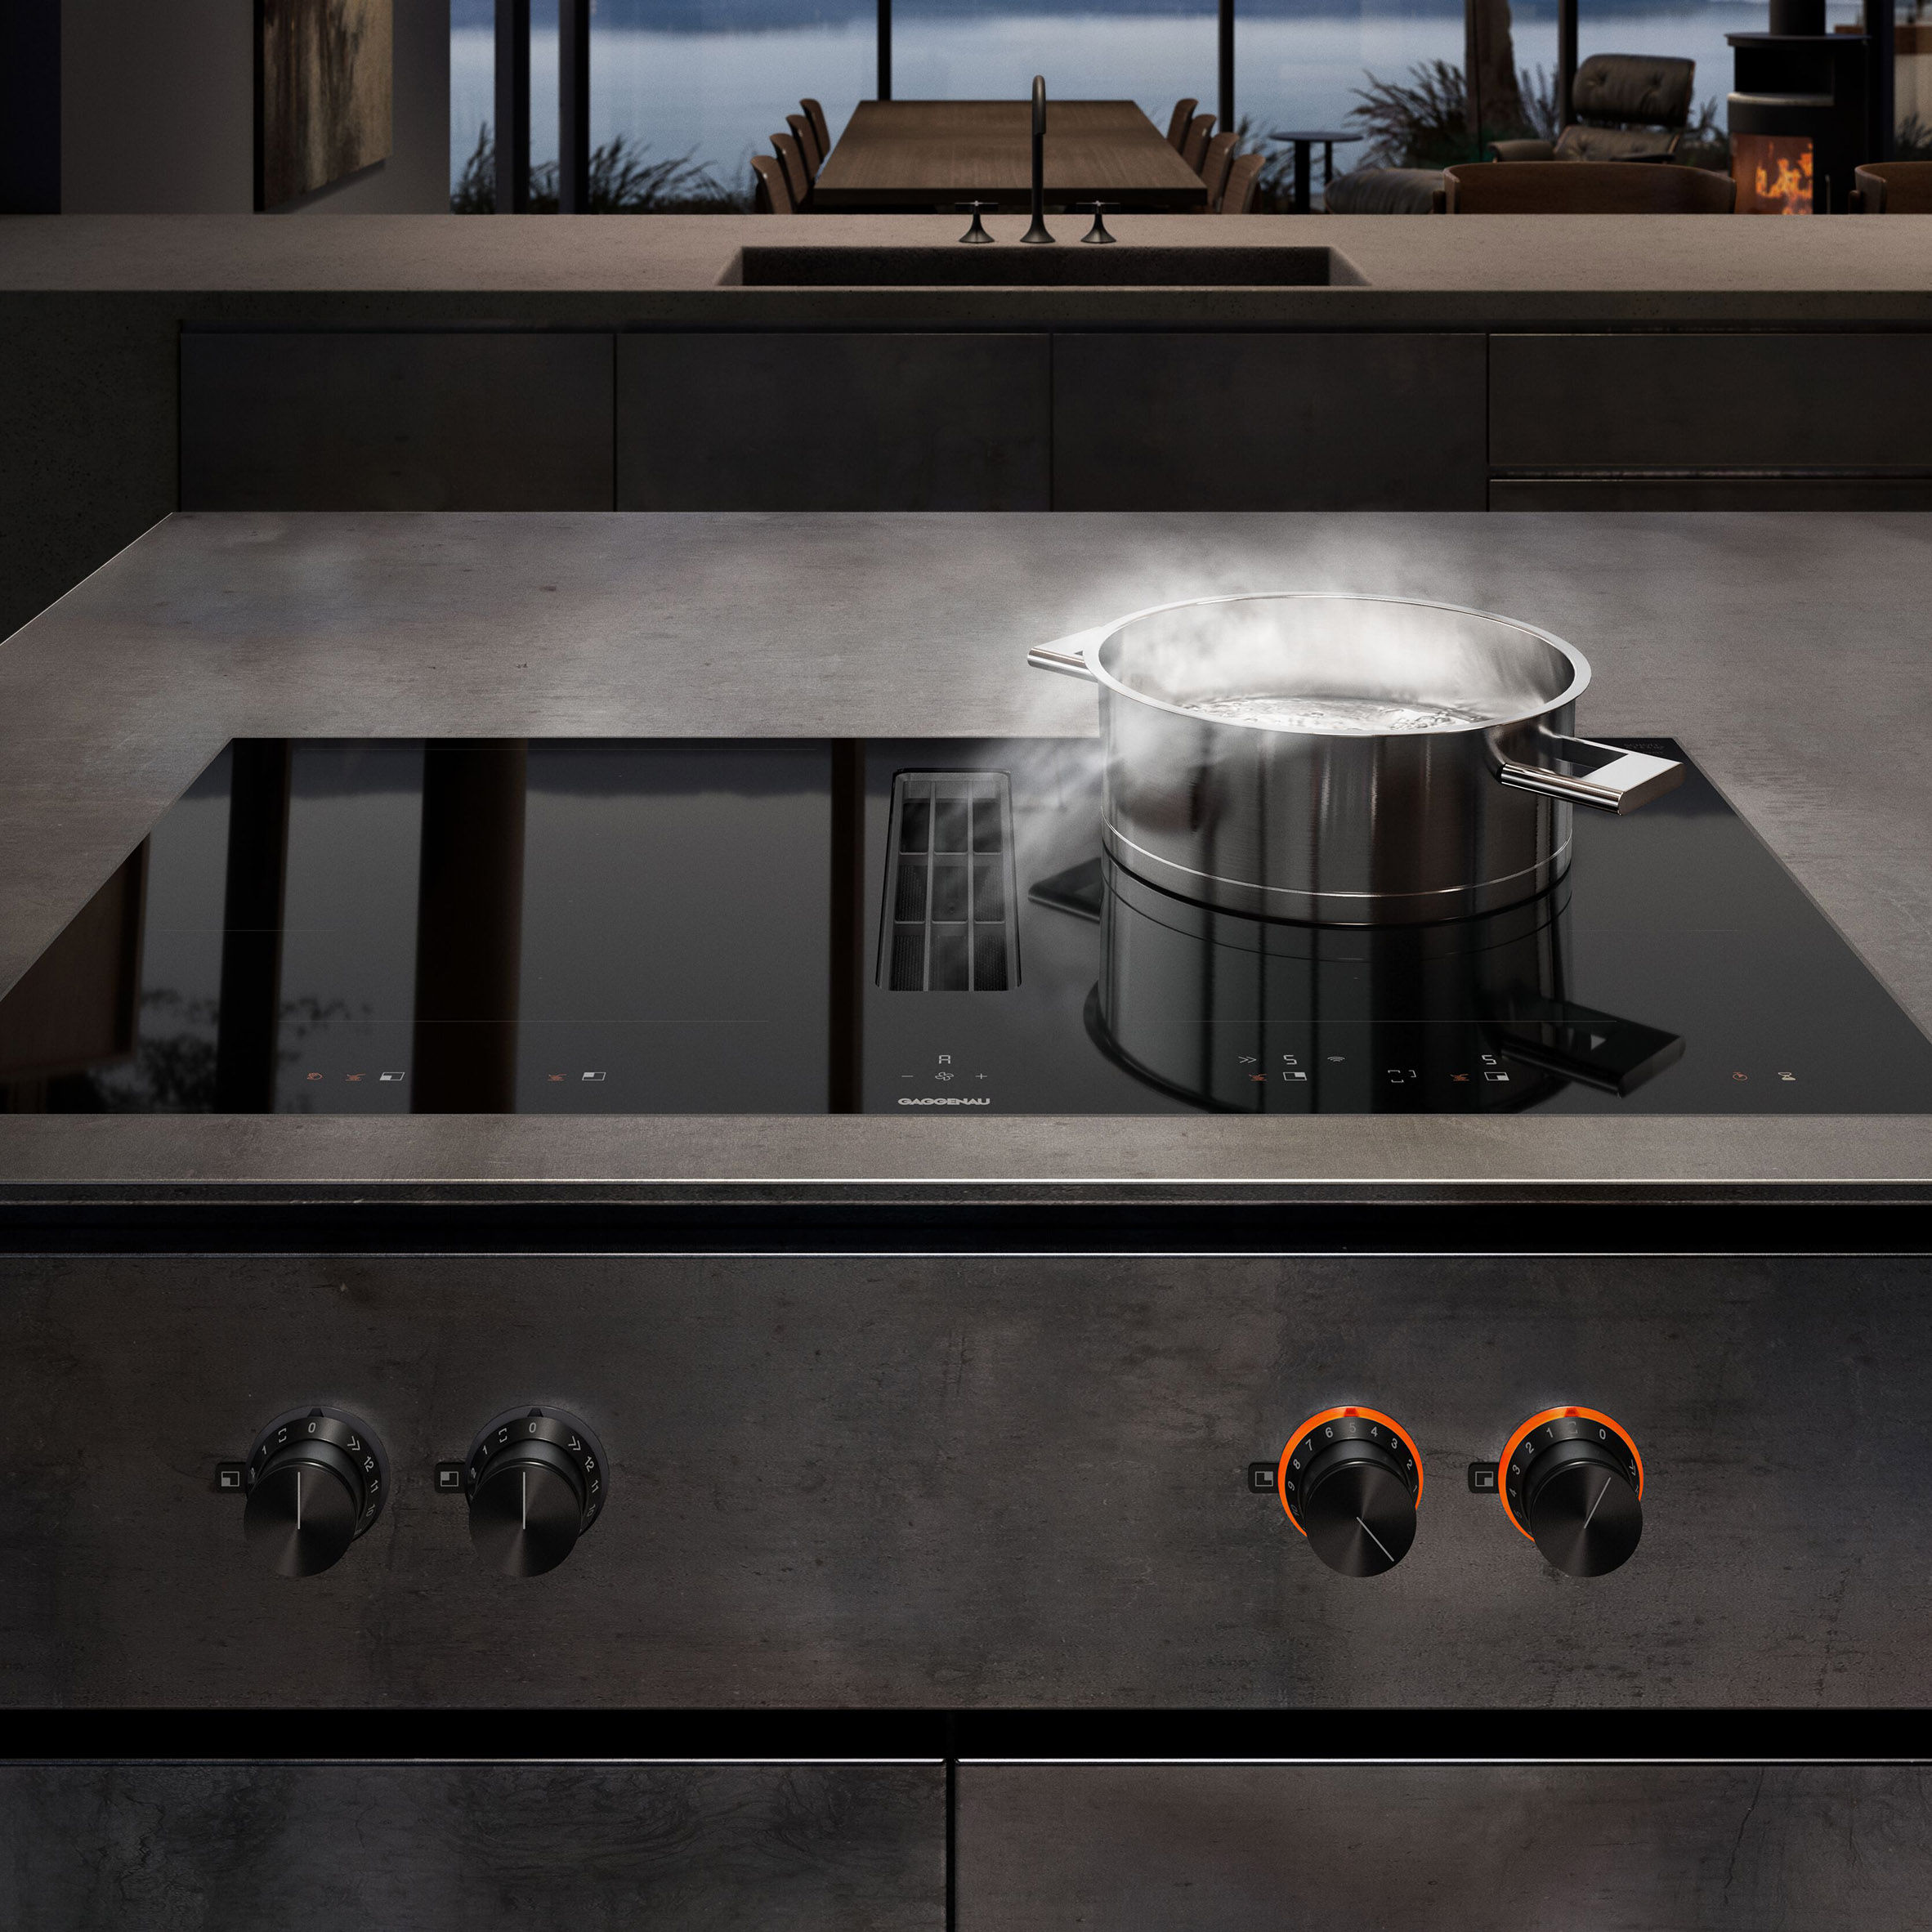 Induction Hob - Faster, Cleaner, and More Energy Efficient Cooking